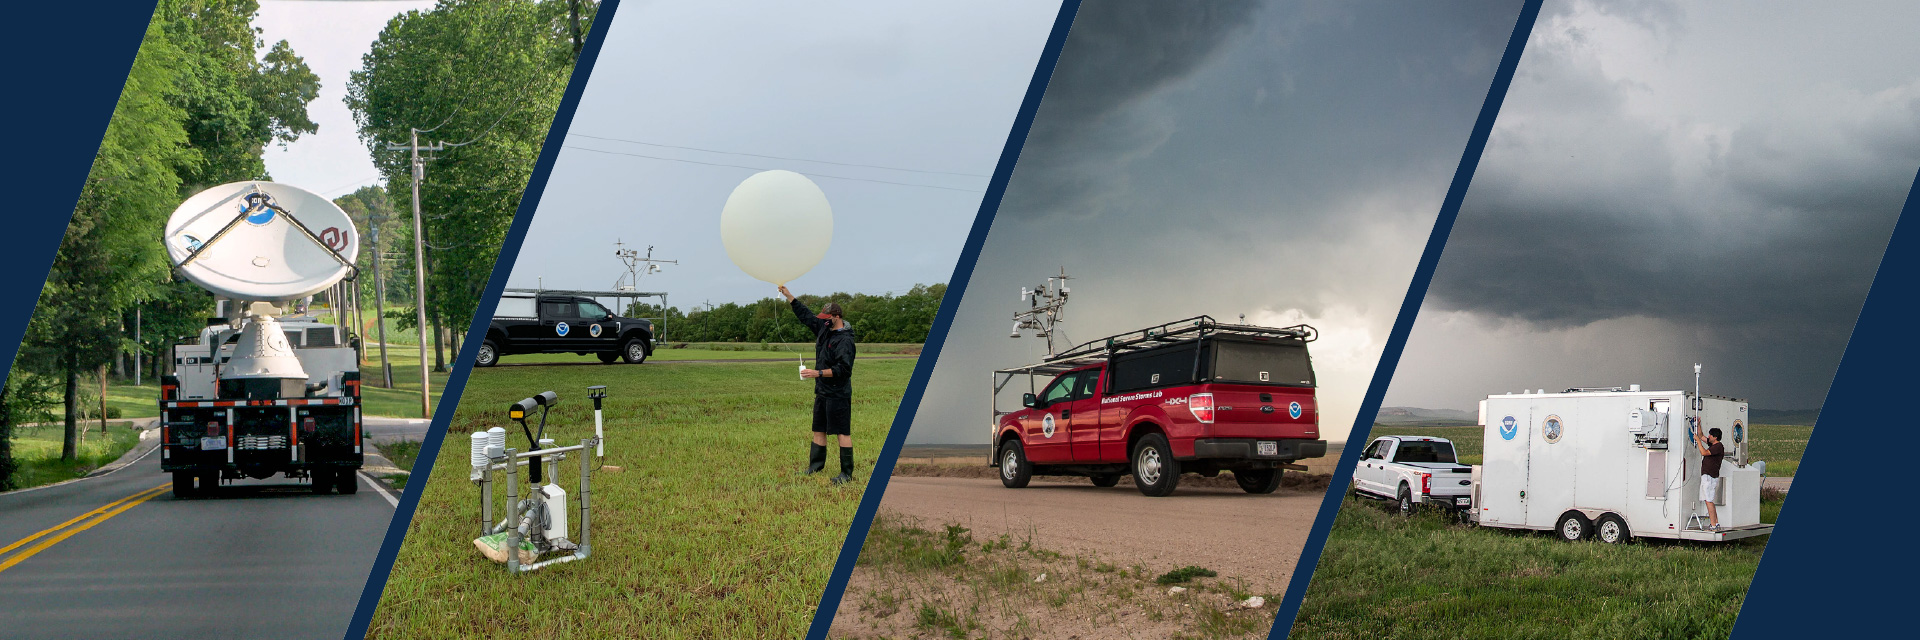 Images of mobile radar, CLAMPS trailer, balloon launch, mobile mesonet